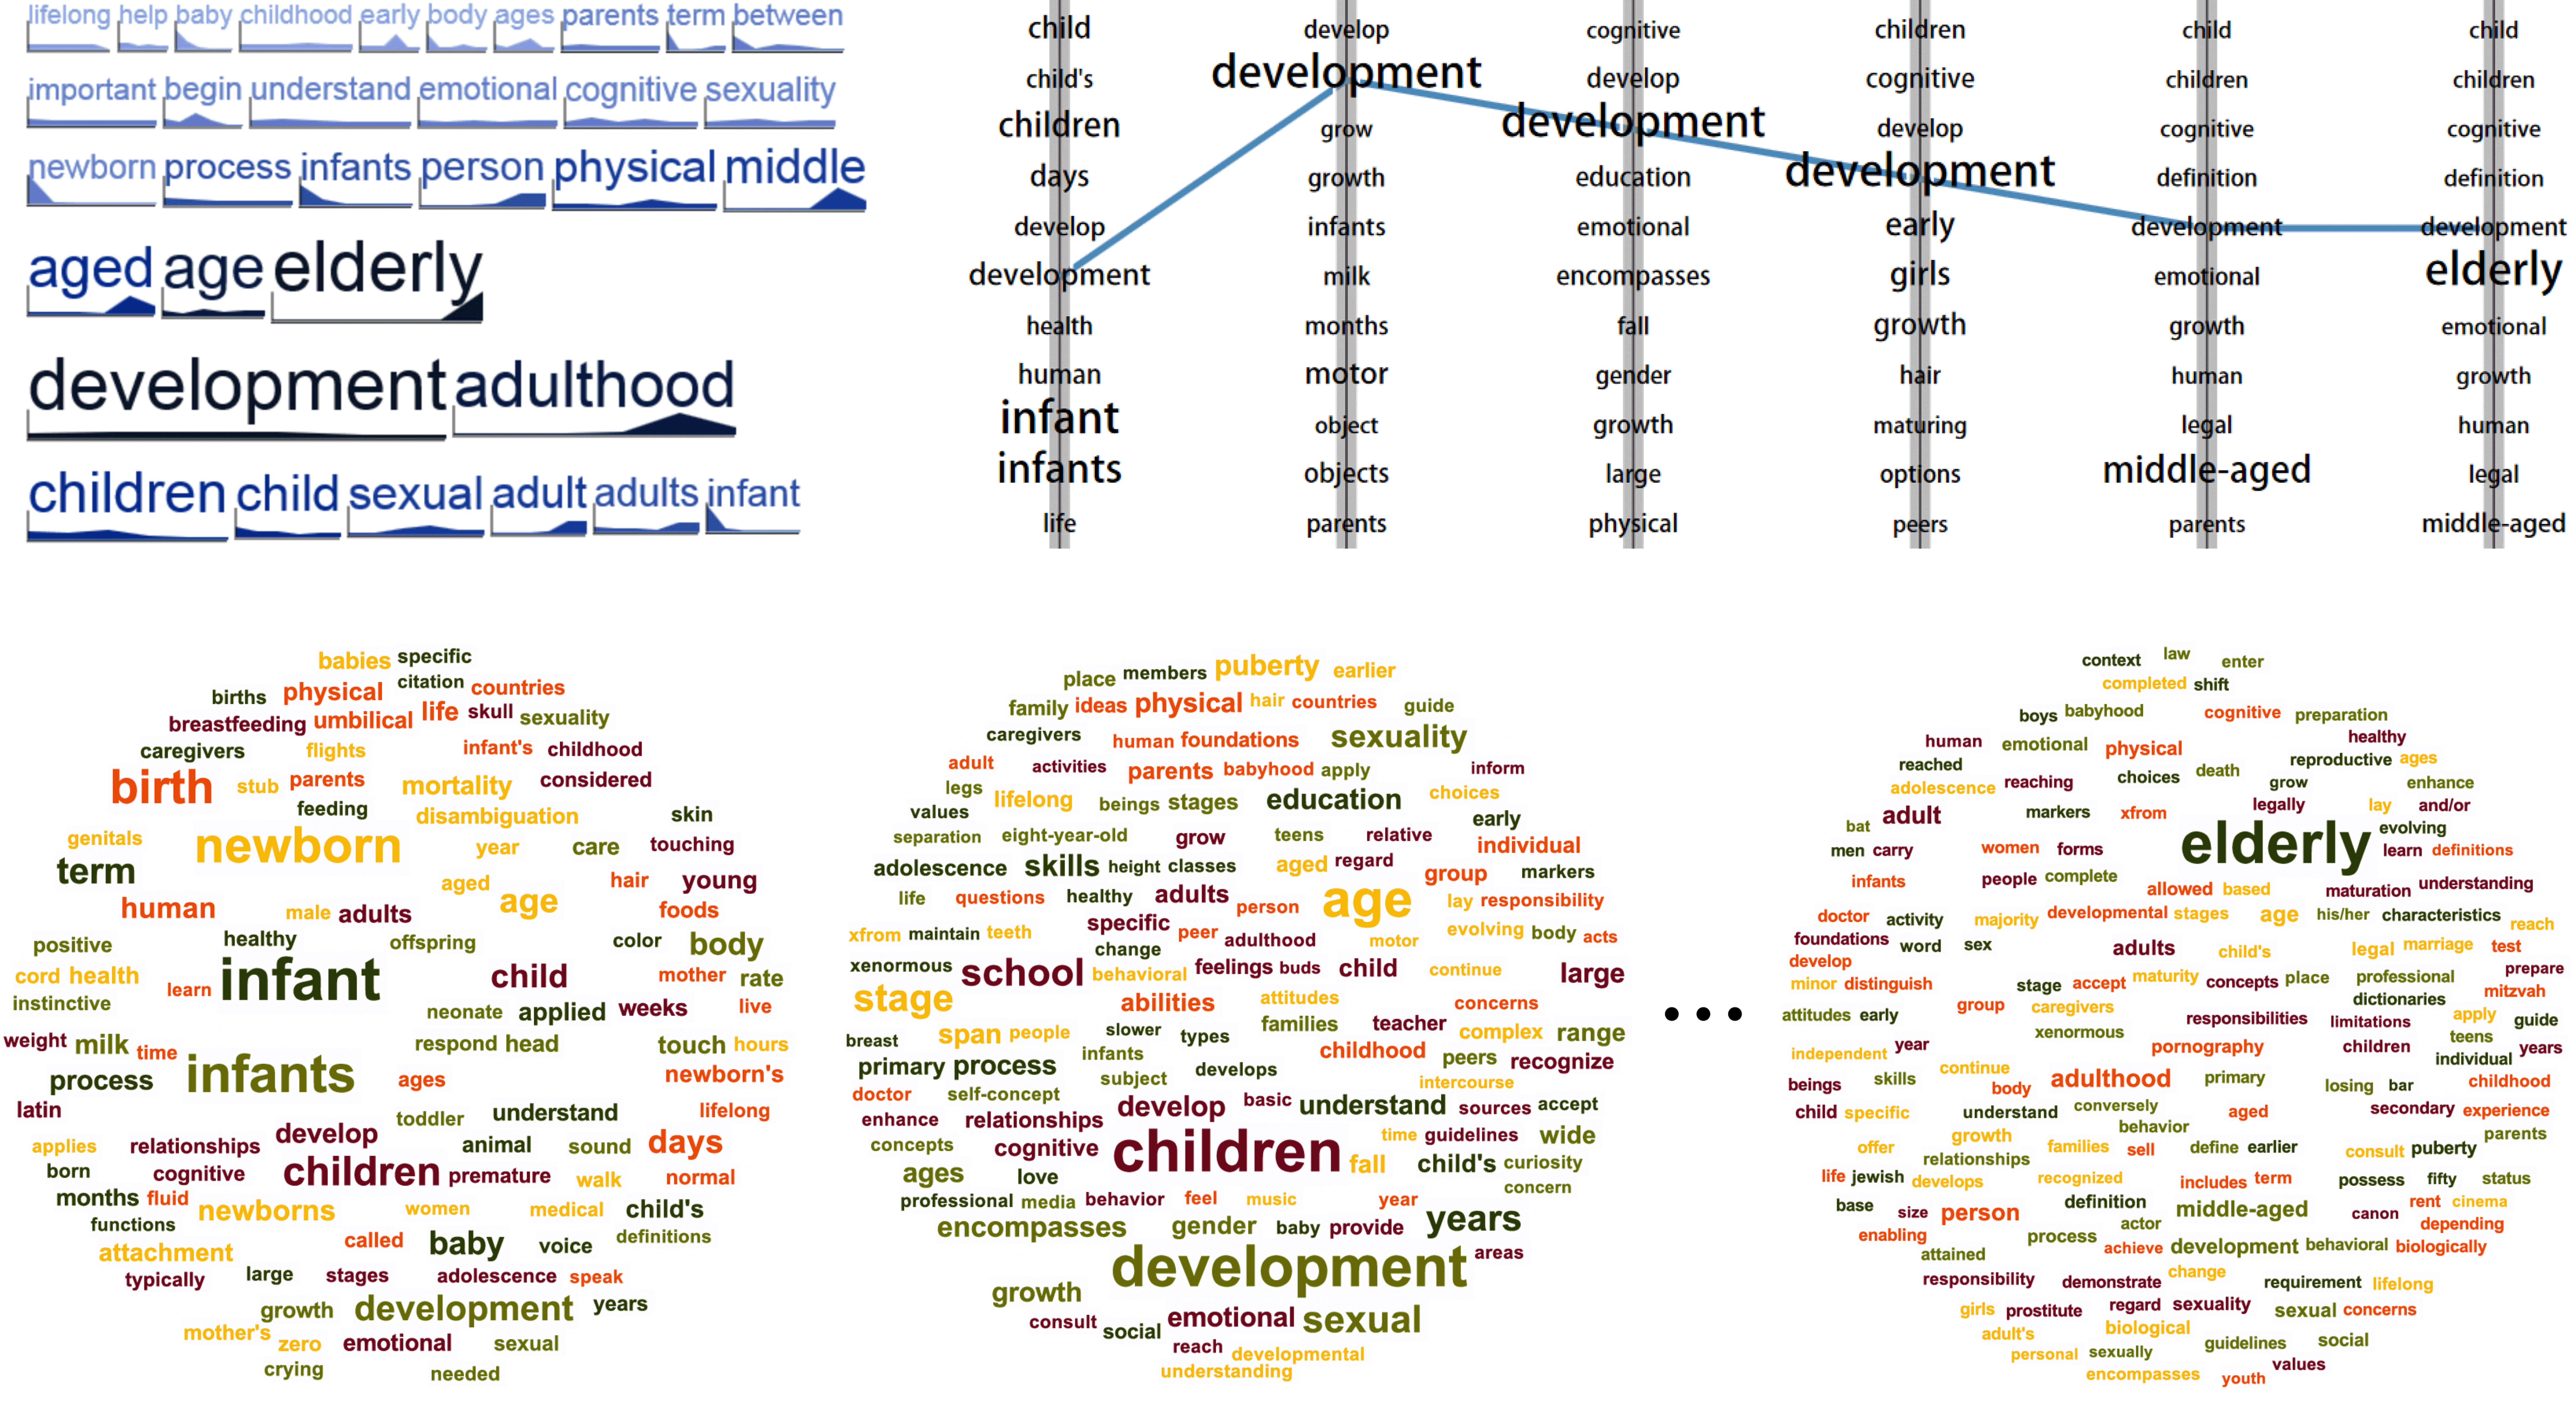 Morphable Word Clouds for Time-Varying Text Data Visualization